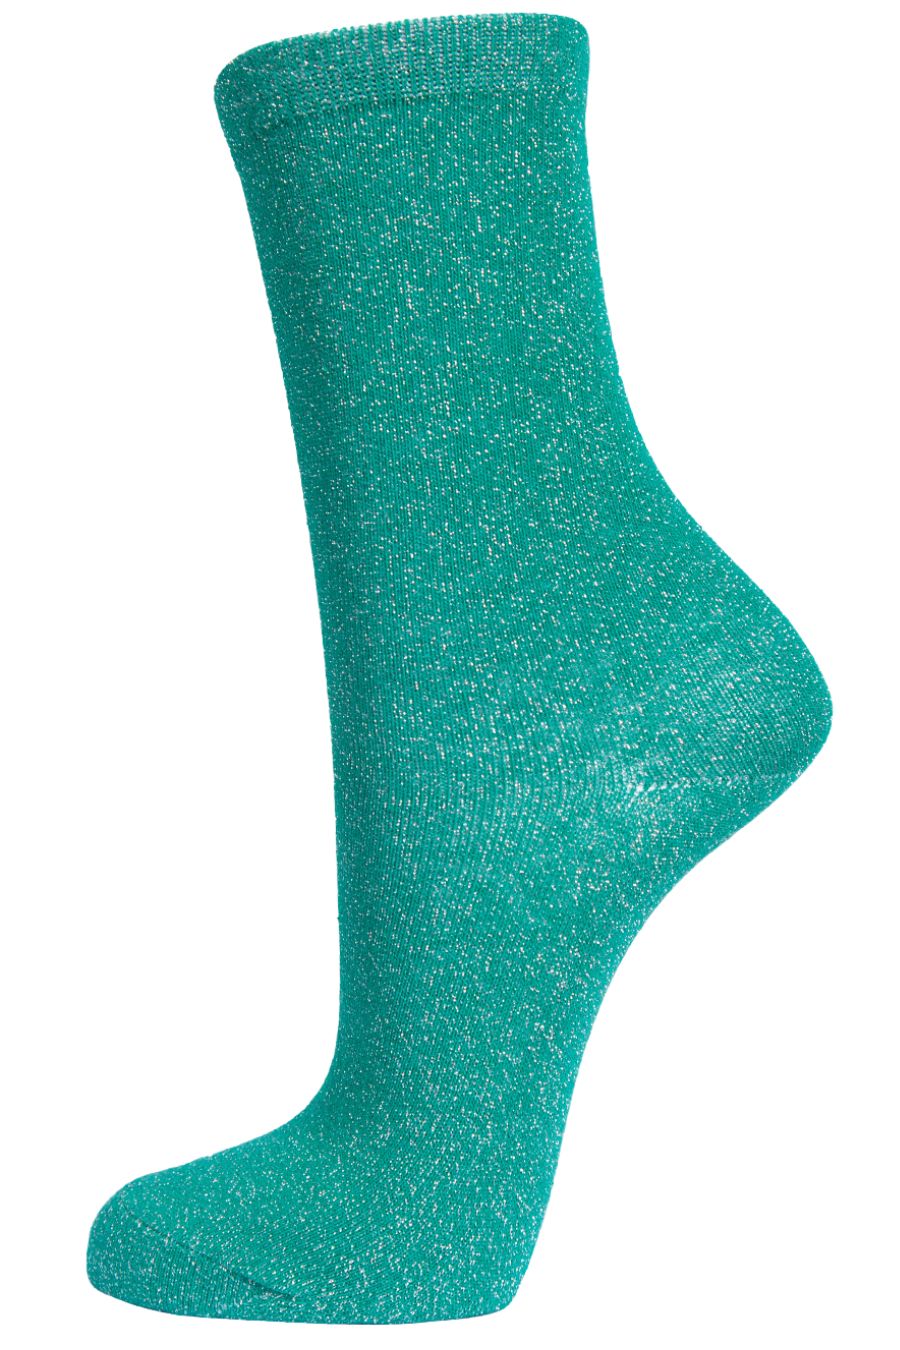 green ankle socks with all over silver glitter shimmer